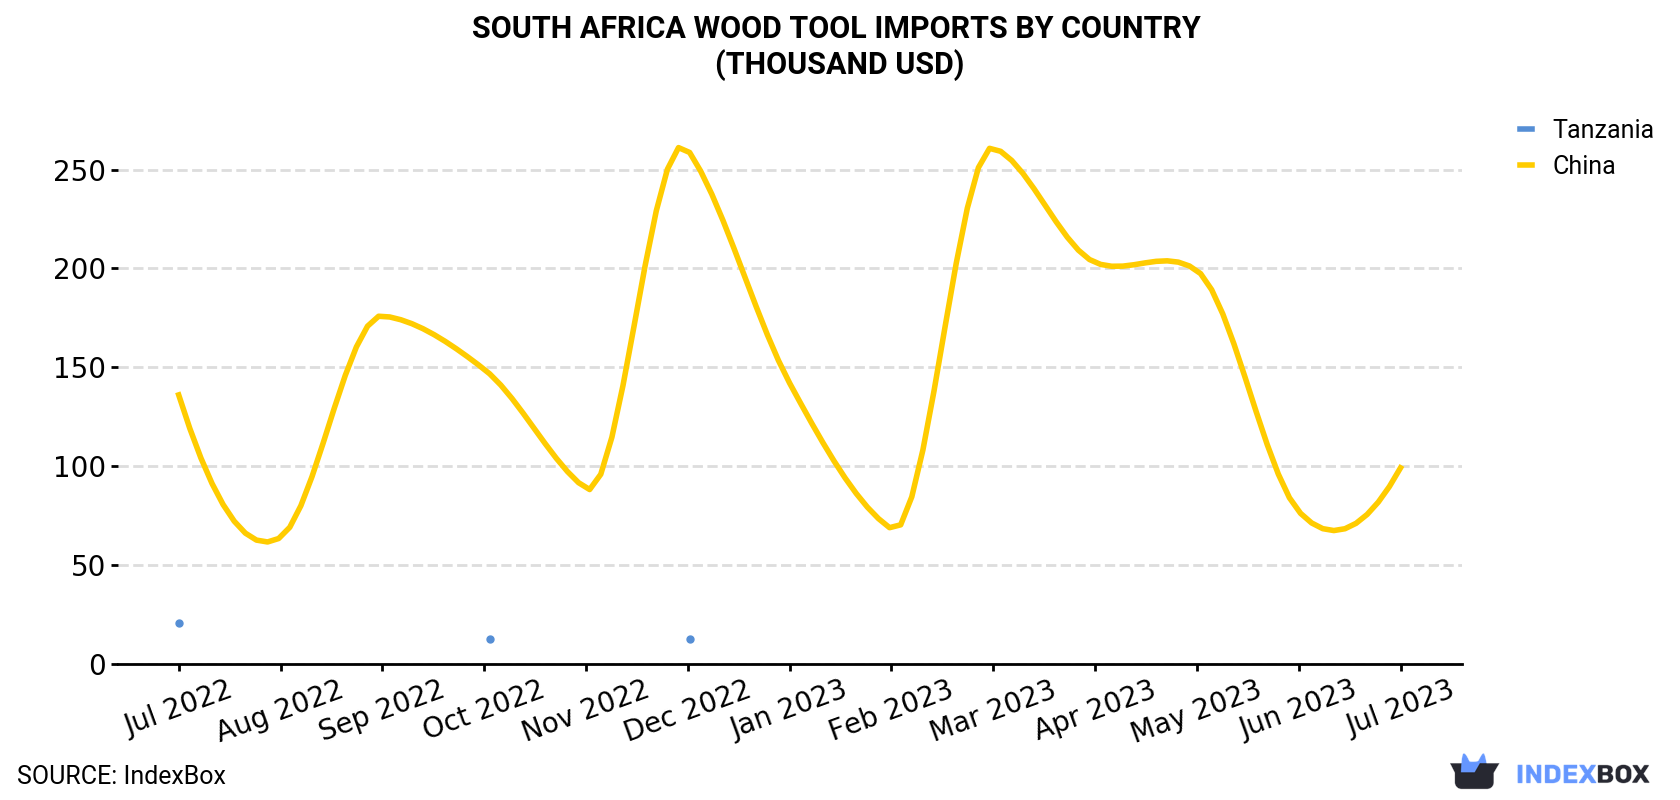 South Africa Wood Tool Imports By Country (Thousand USD)